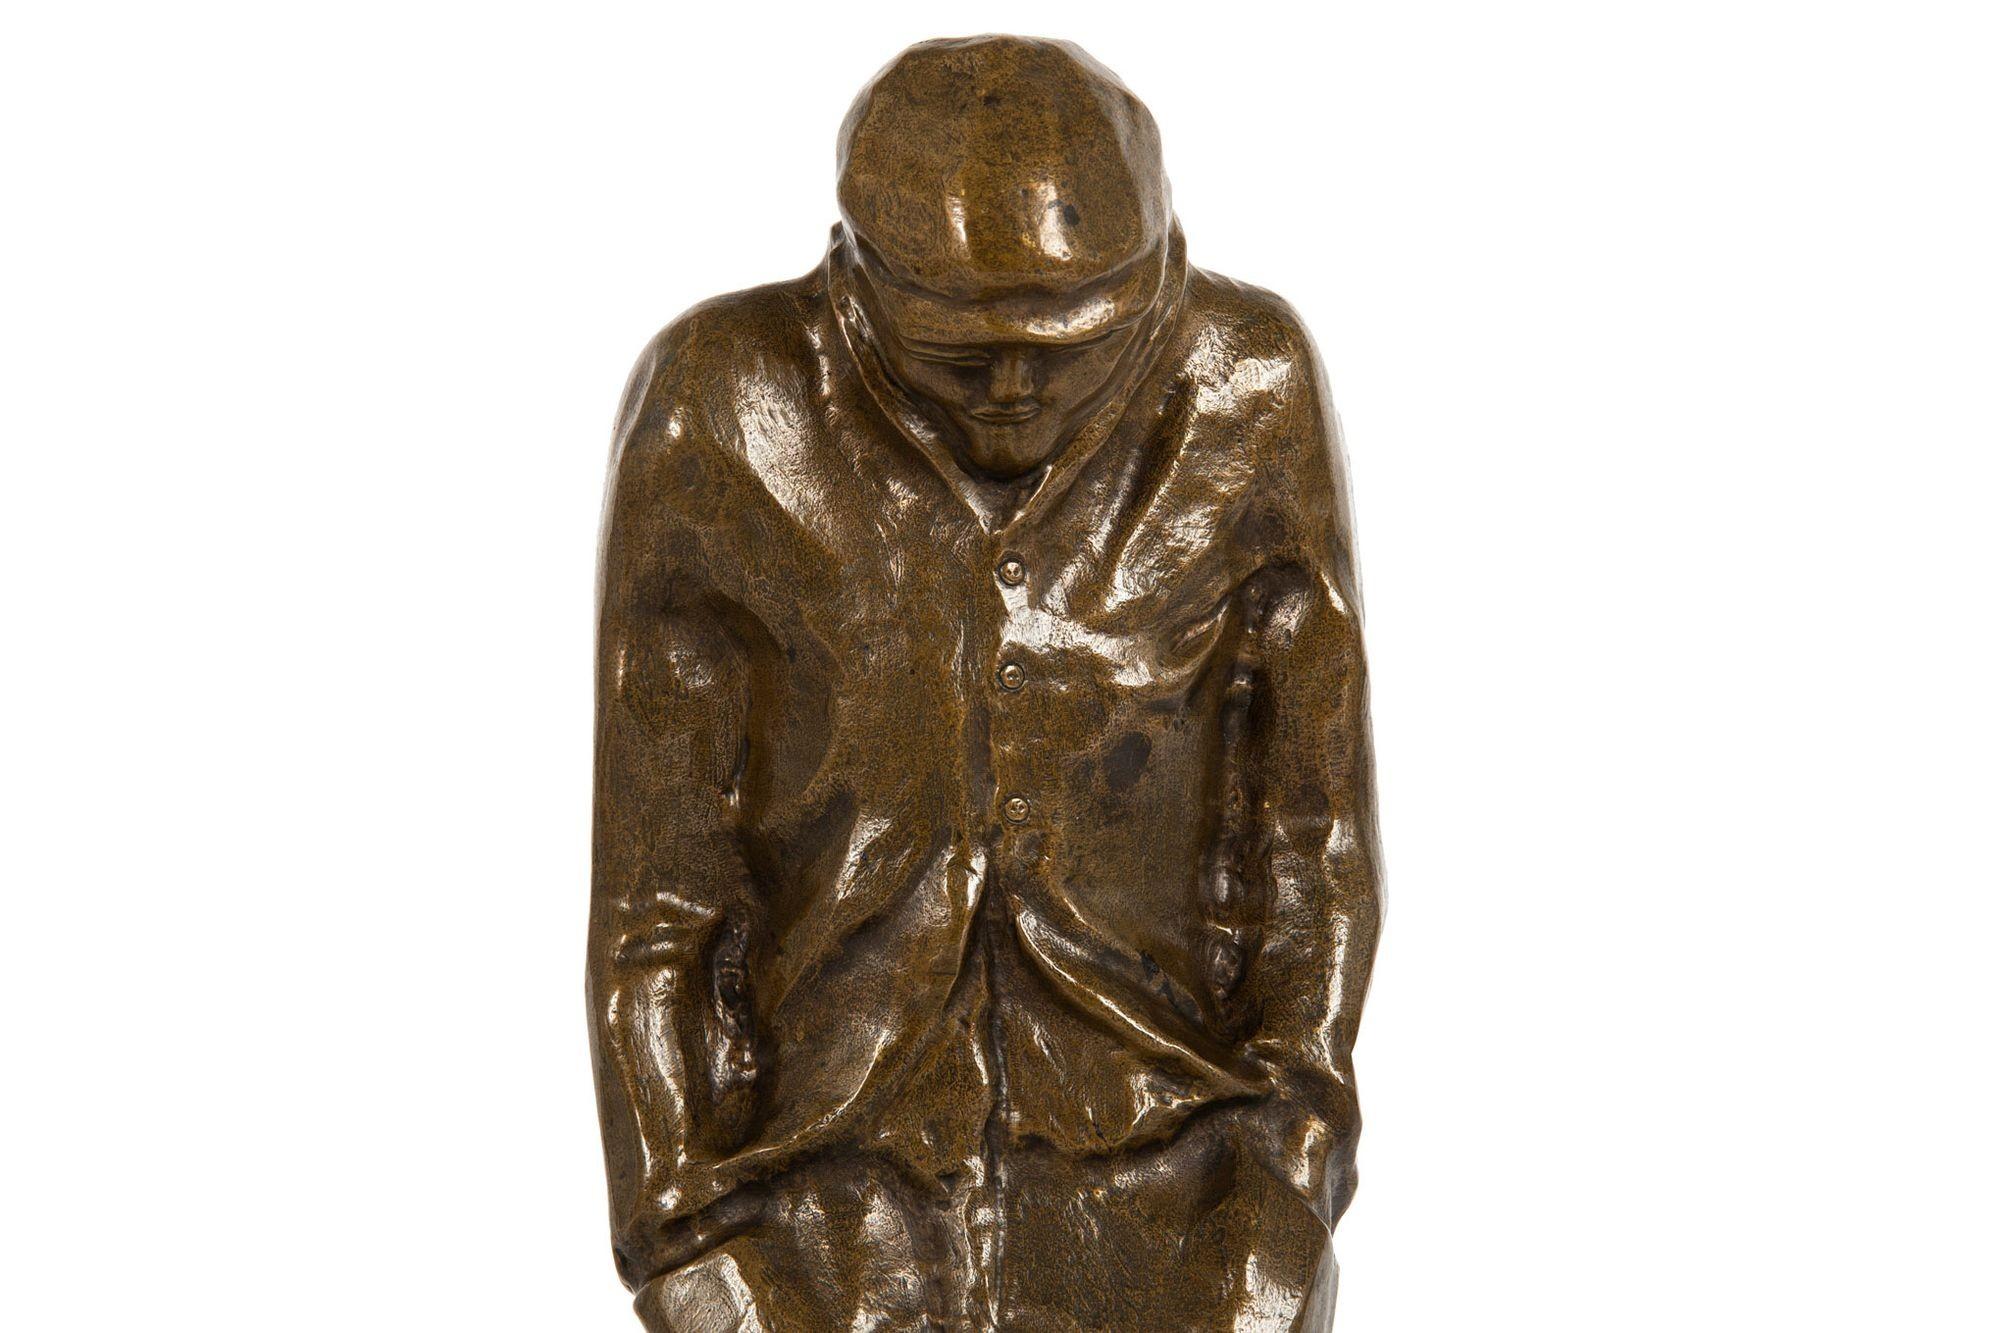 French Bronze Sculpture “Shivering Worker” in manner of Constantin Meunier For Sale 2